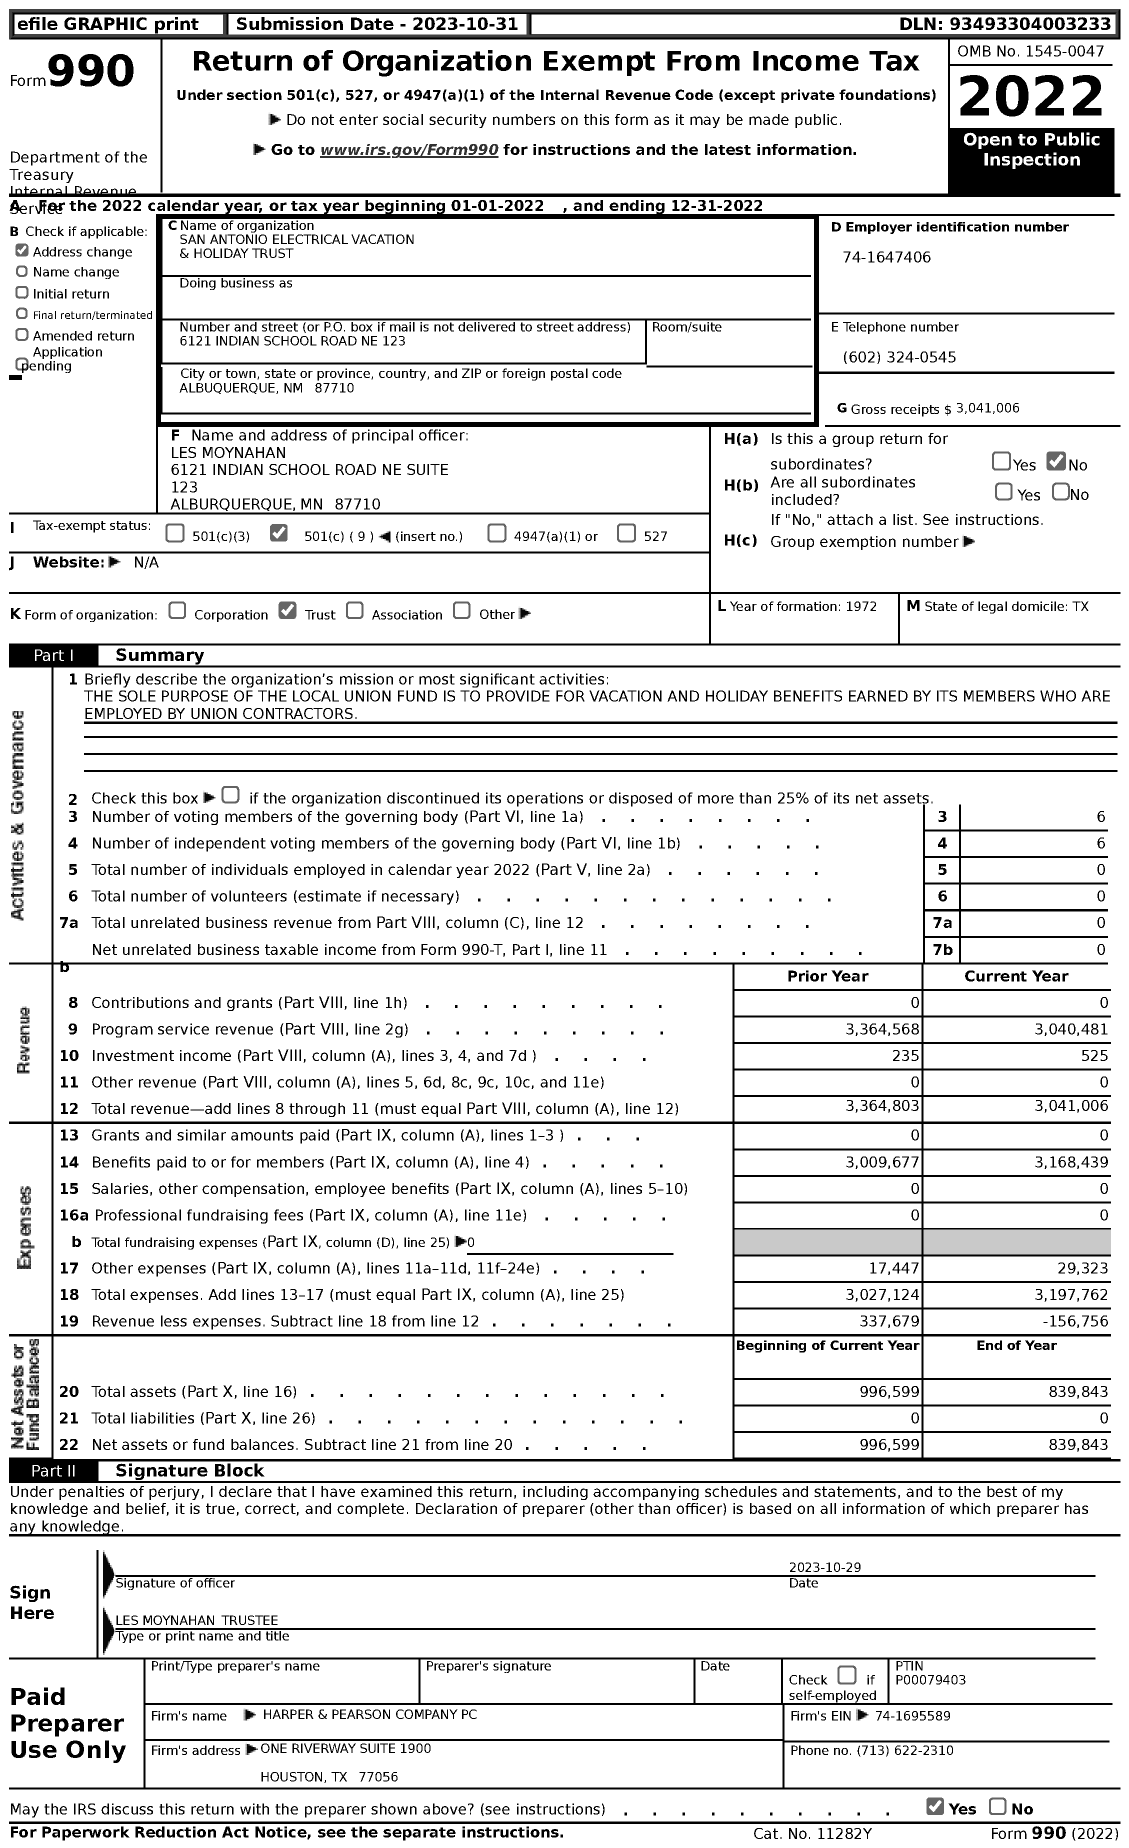 Image of first page of 2022 Form 990 for San Antonio Electrical Vacation and Holiday Trust